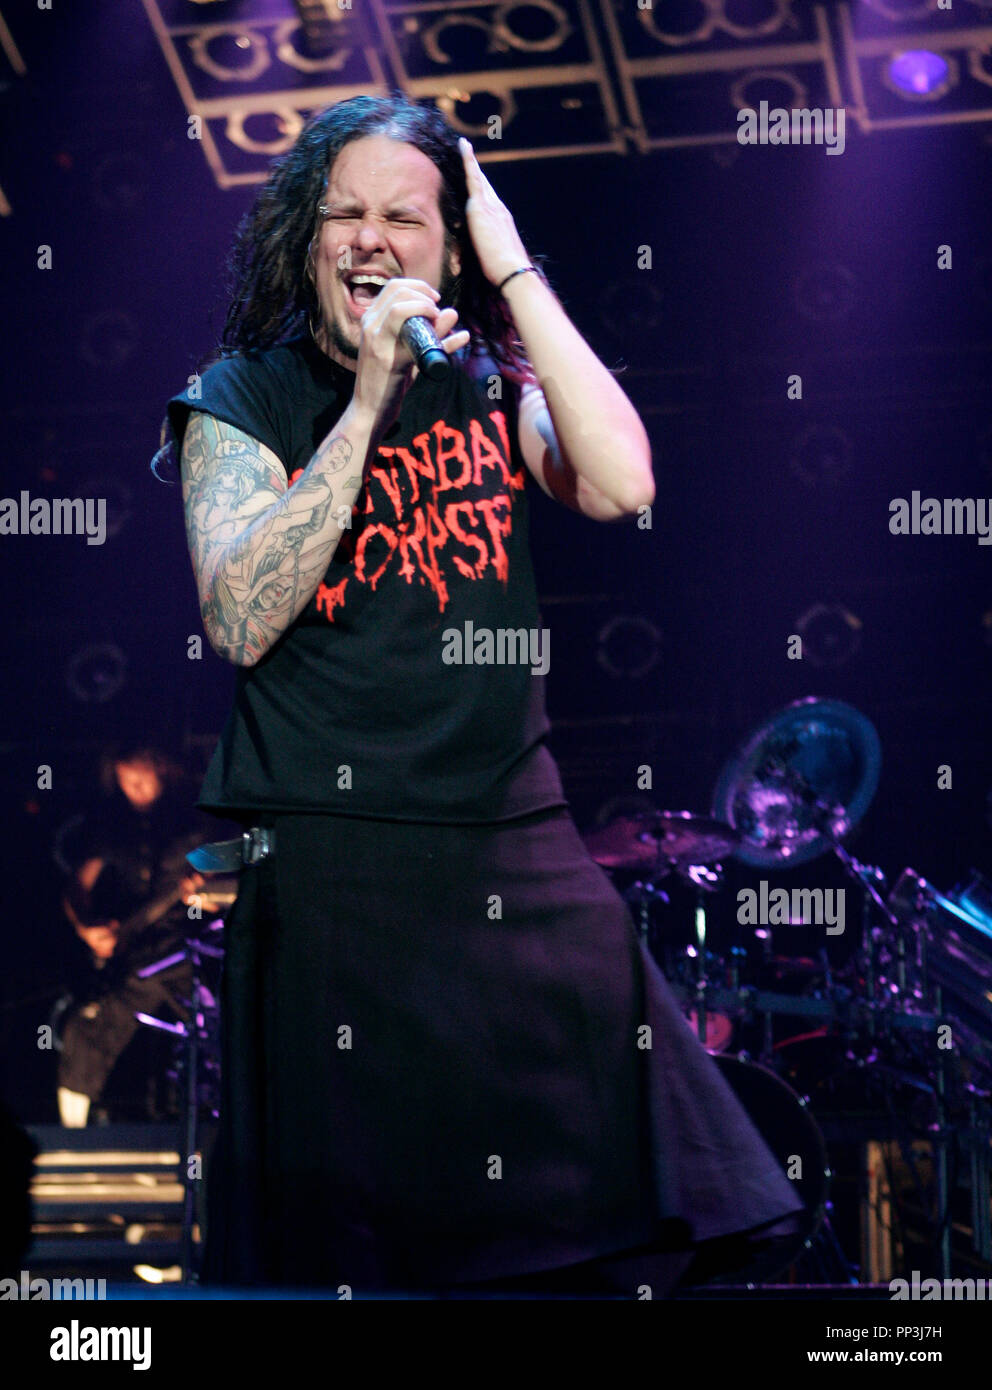 Jonathan Davis with Korn performs in concert at the Sound Advice Amphitheatre in West Palm Beach, Florida on August 14, 2007. Stock Photo